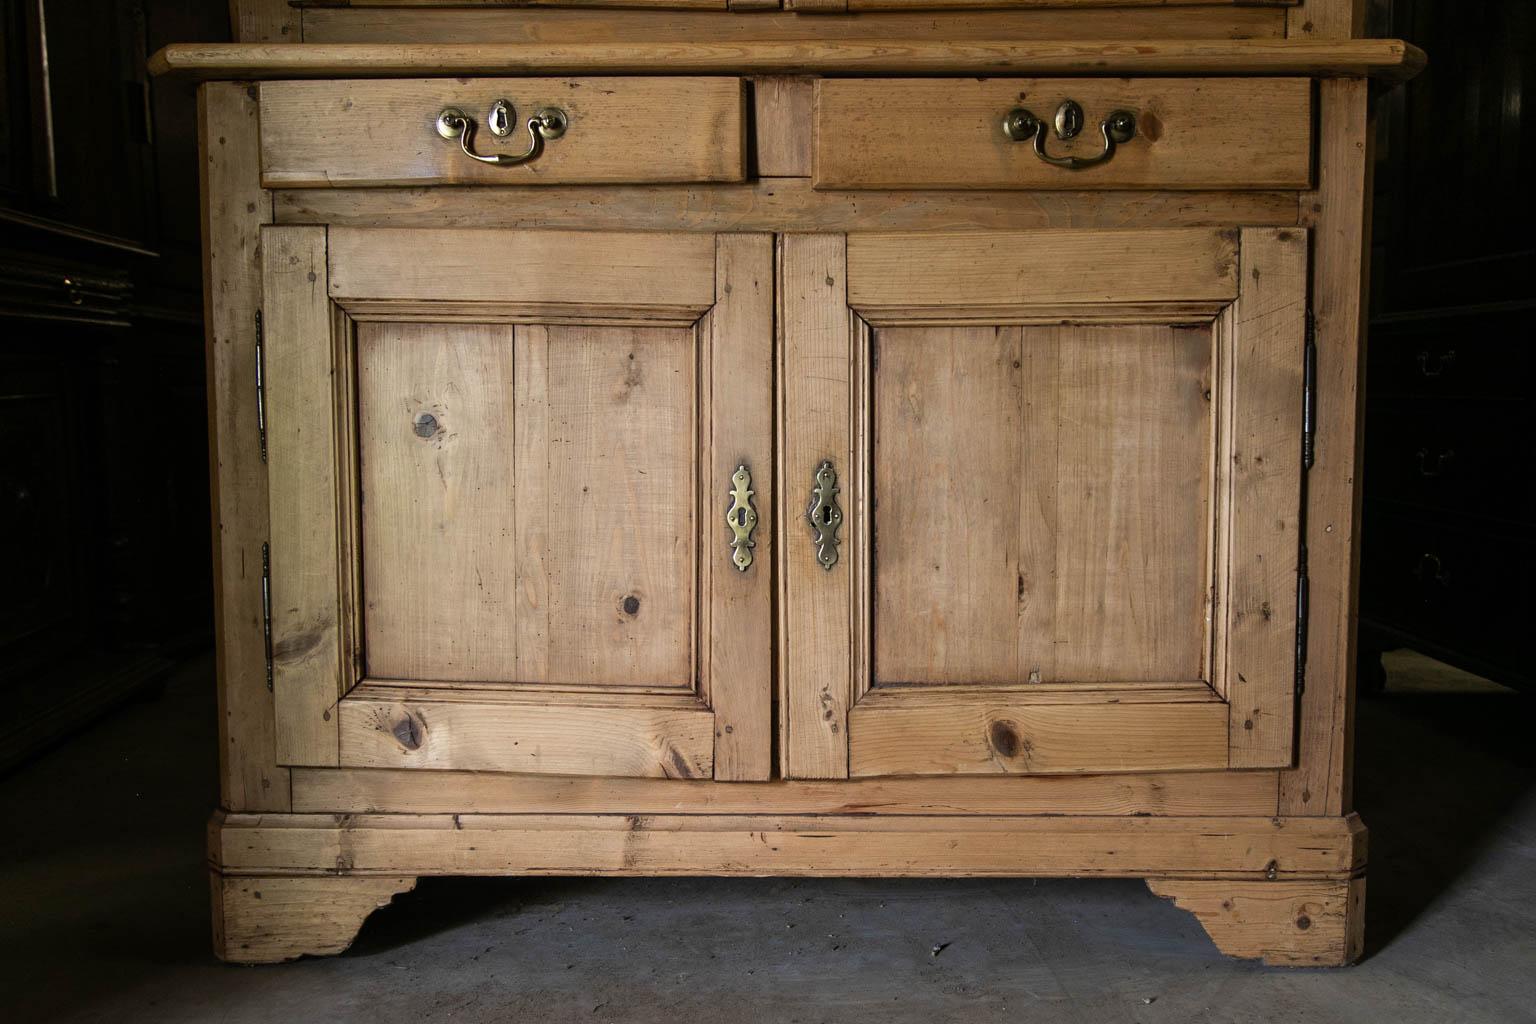 This cupboard has exposed peg construction. The sides have recessed panels on the top and bottom. The doors have recessed panels framed with carved molding. The interior of the upper half has two fixed shelves while the lower half has one. The sides